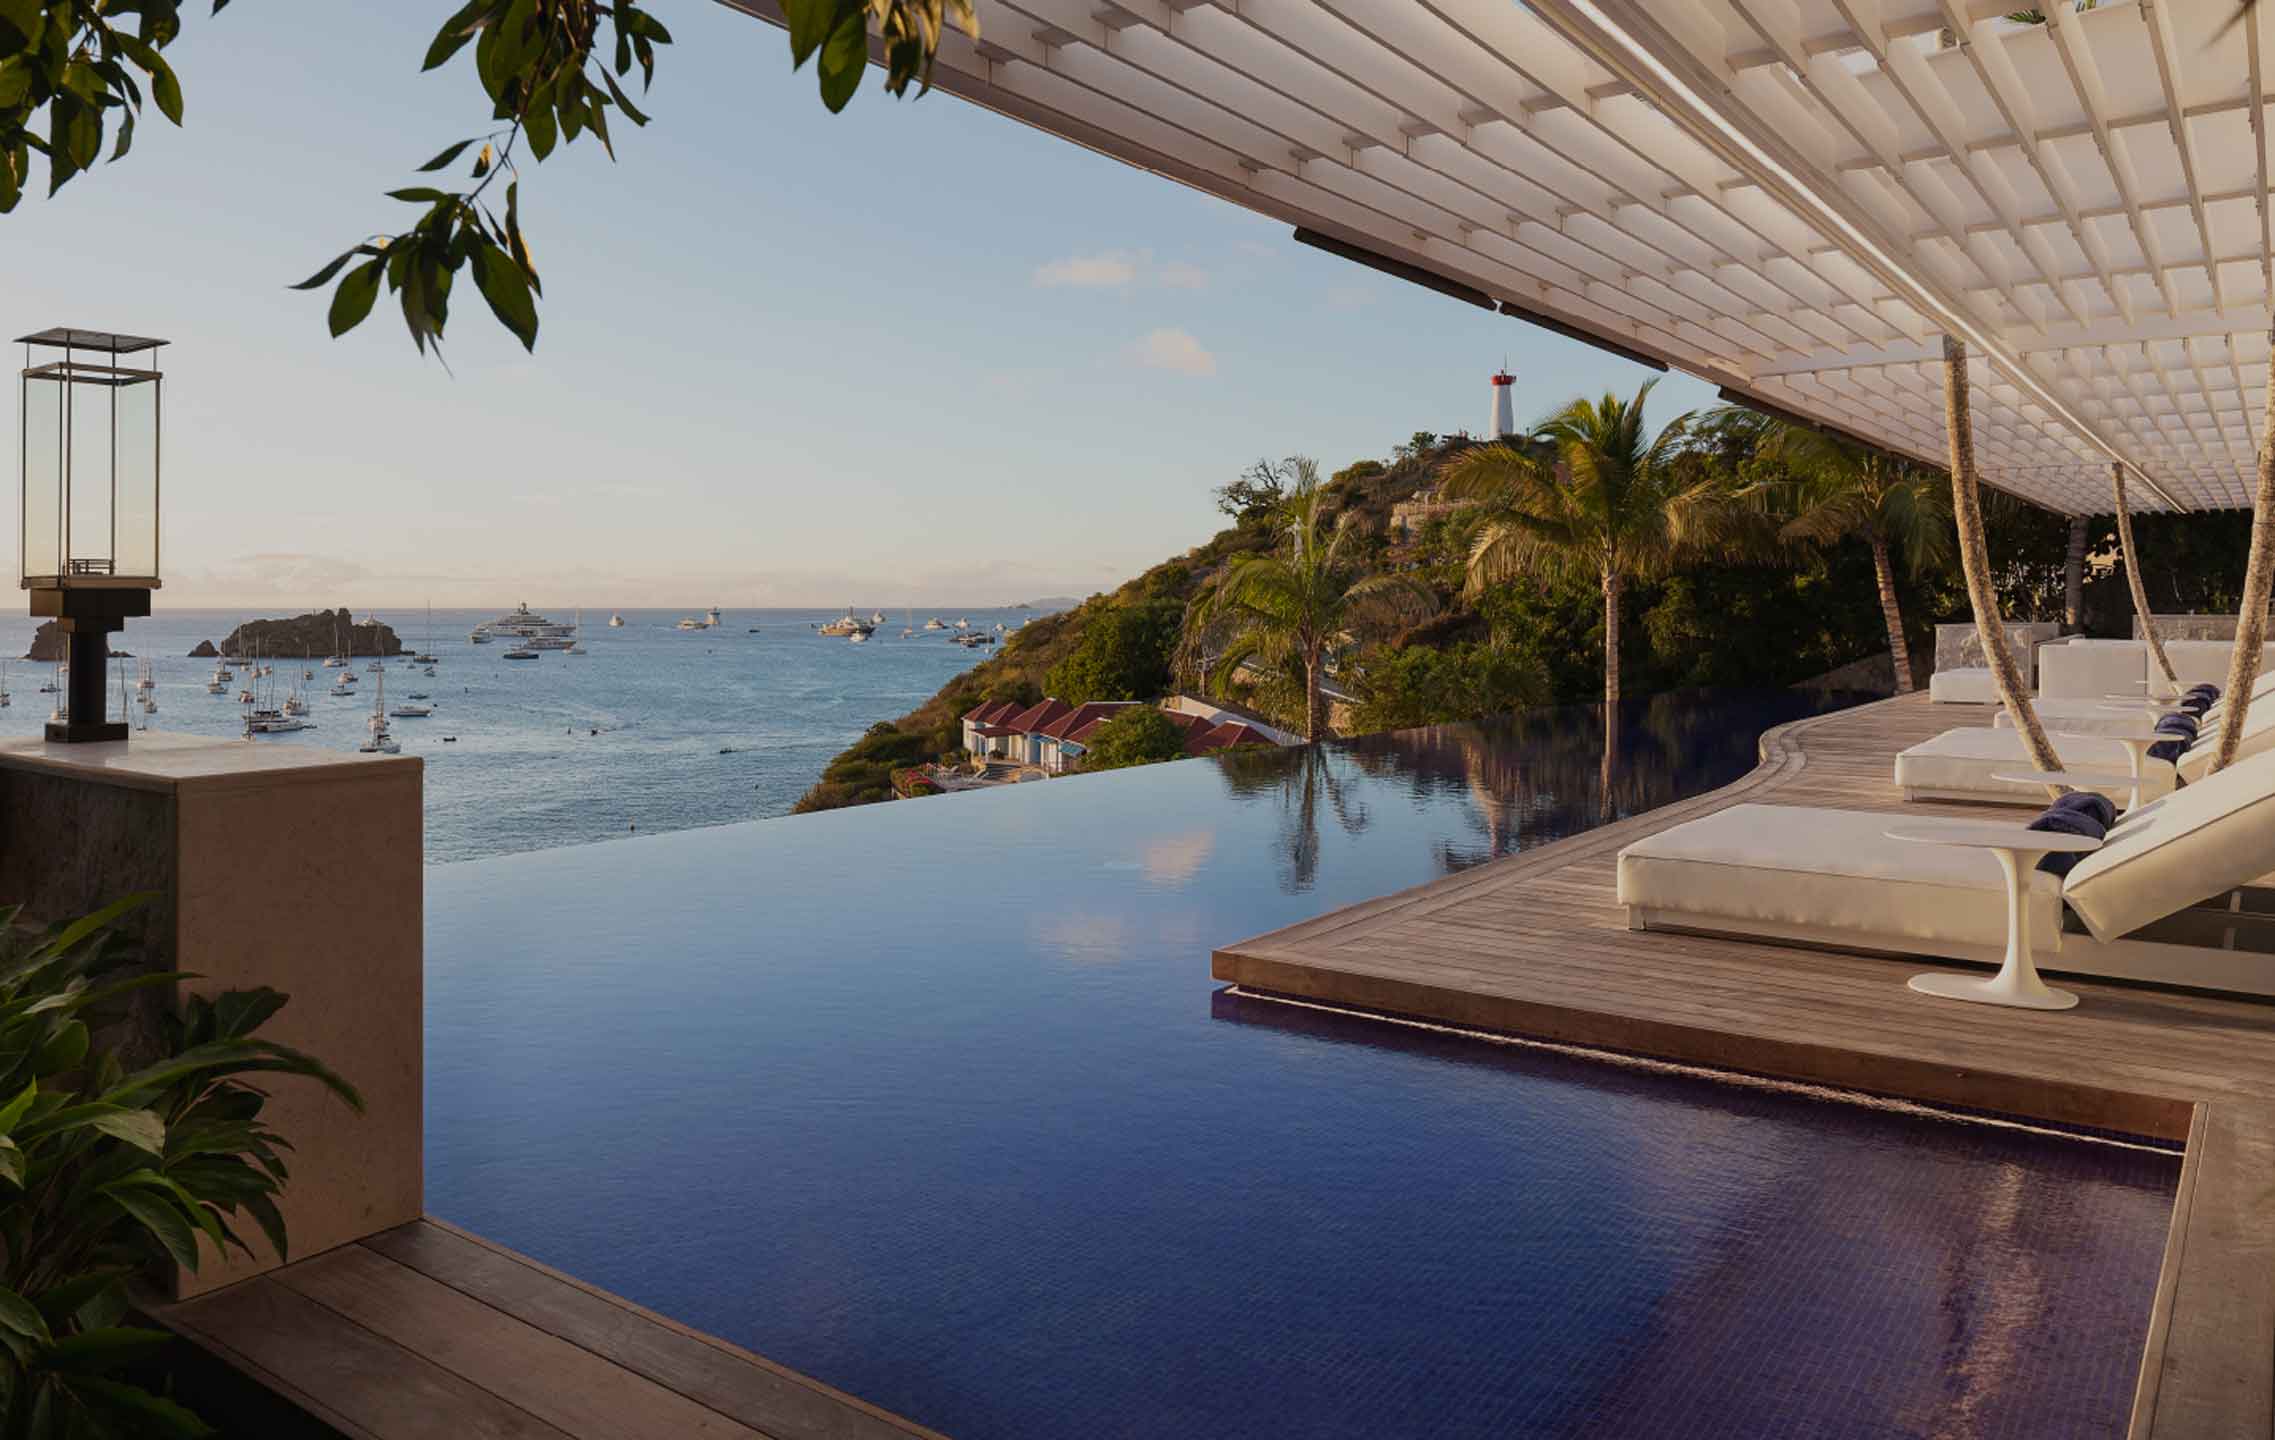 Villa with an infinity pool and a beautiful view of the ocean